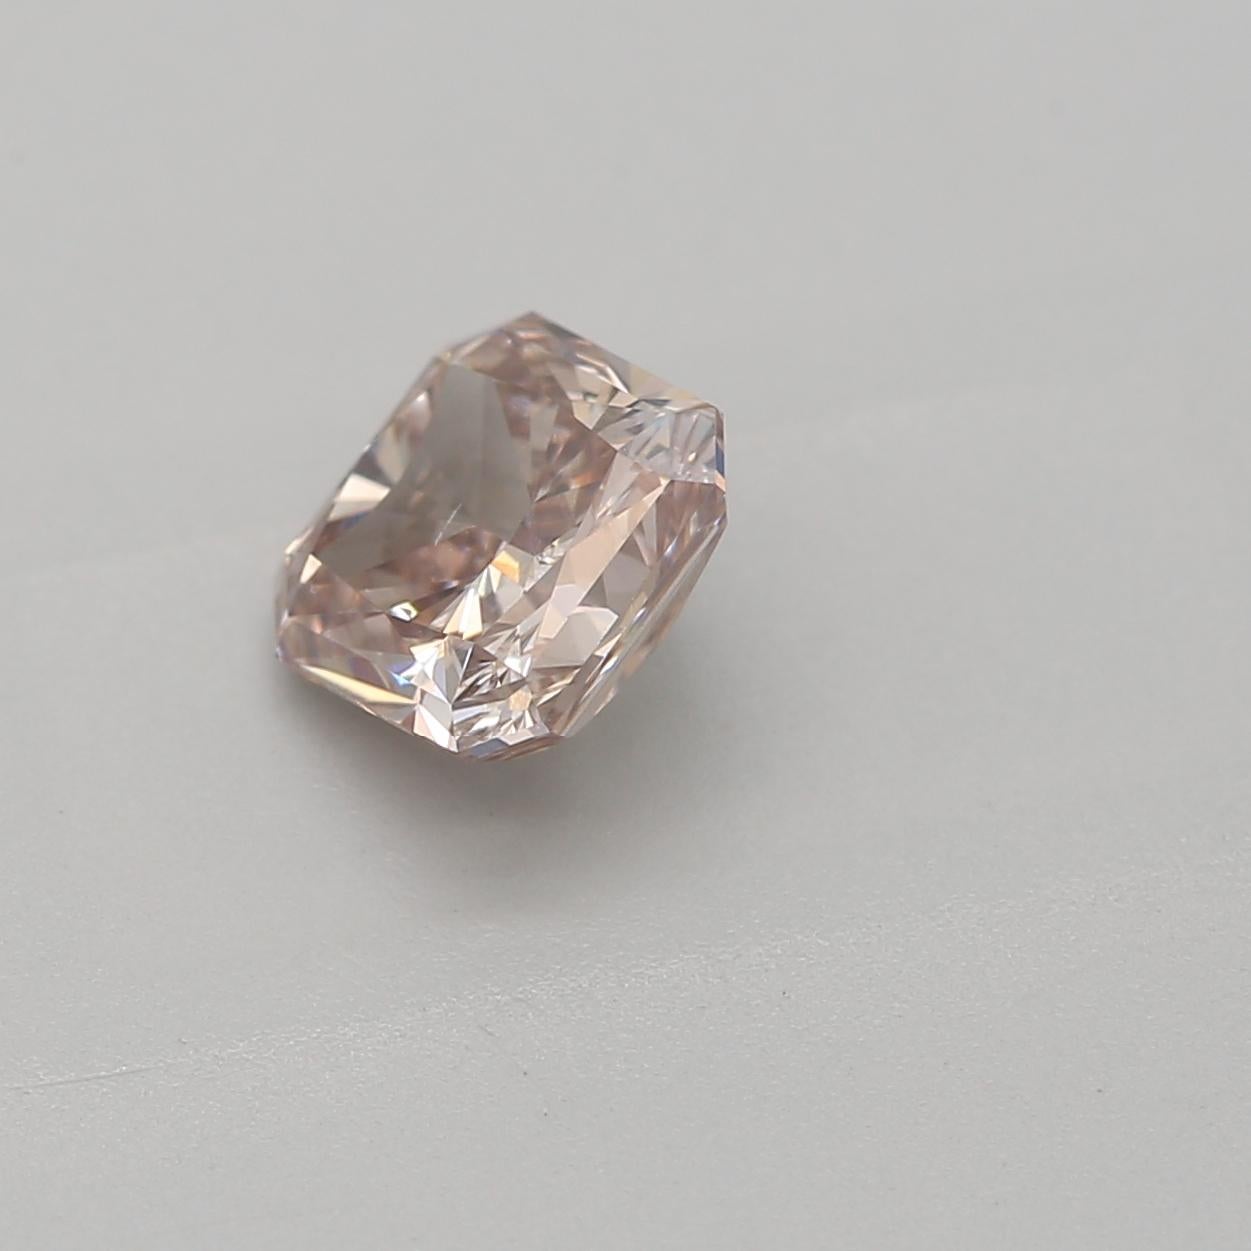 Radiant Cut 0.53-CARAT, FANCY PINK BROWN, RADIANT CUT DIAMOND SI1 Clarity GIA Certified For Sale